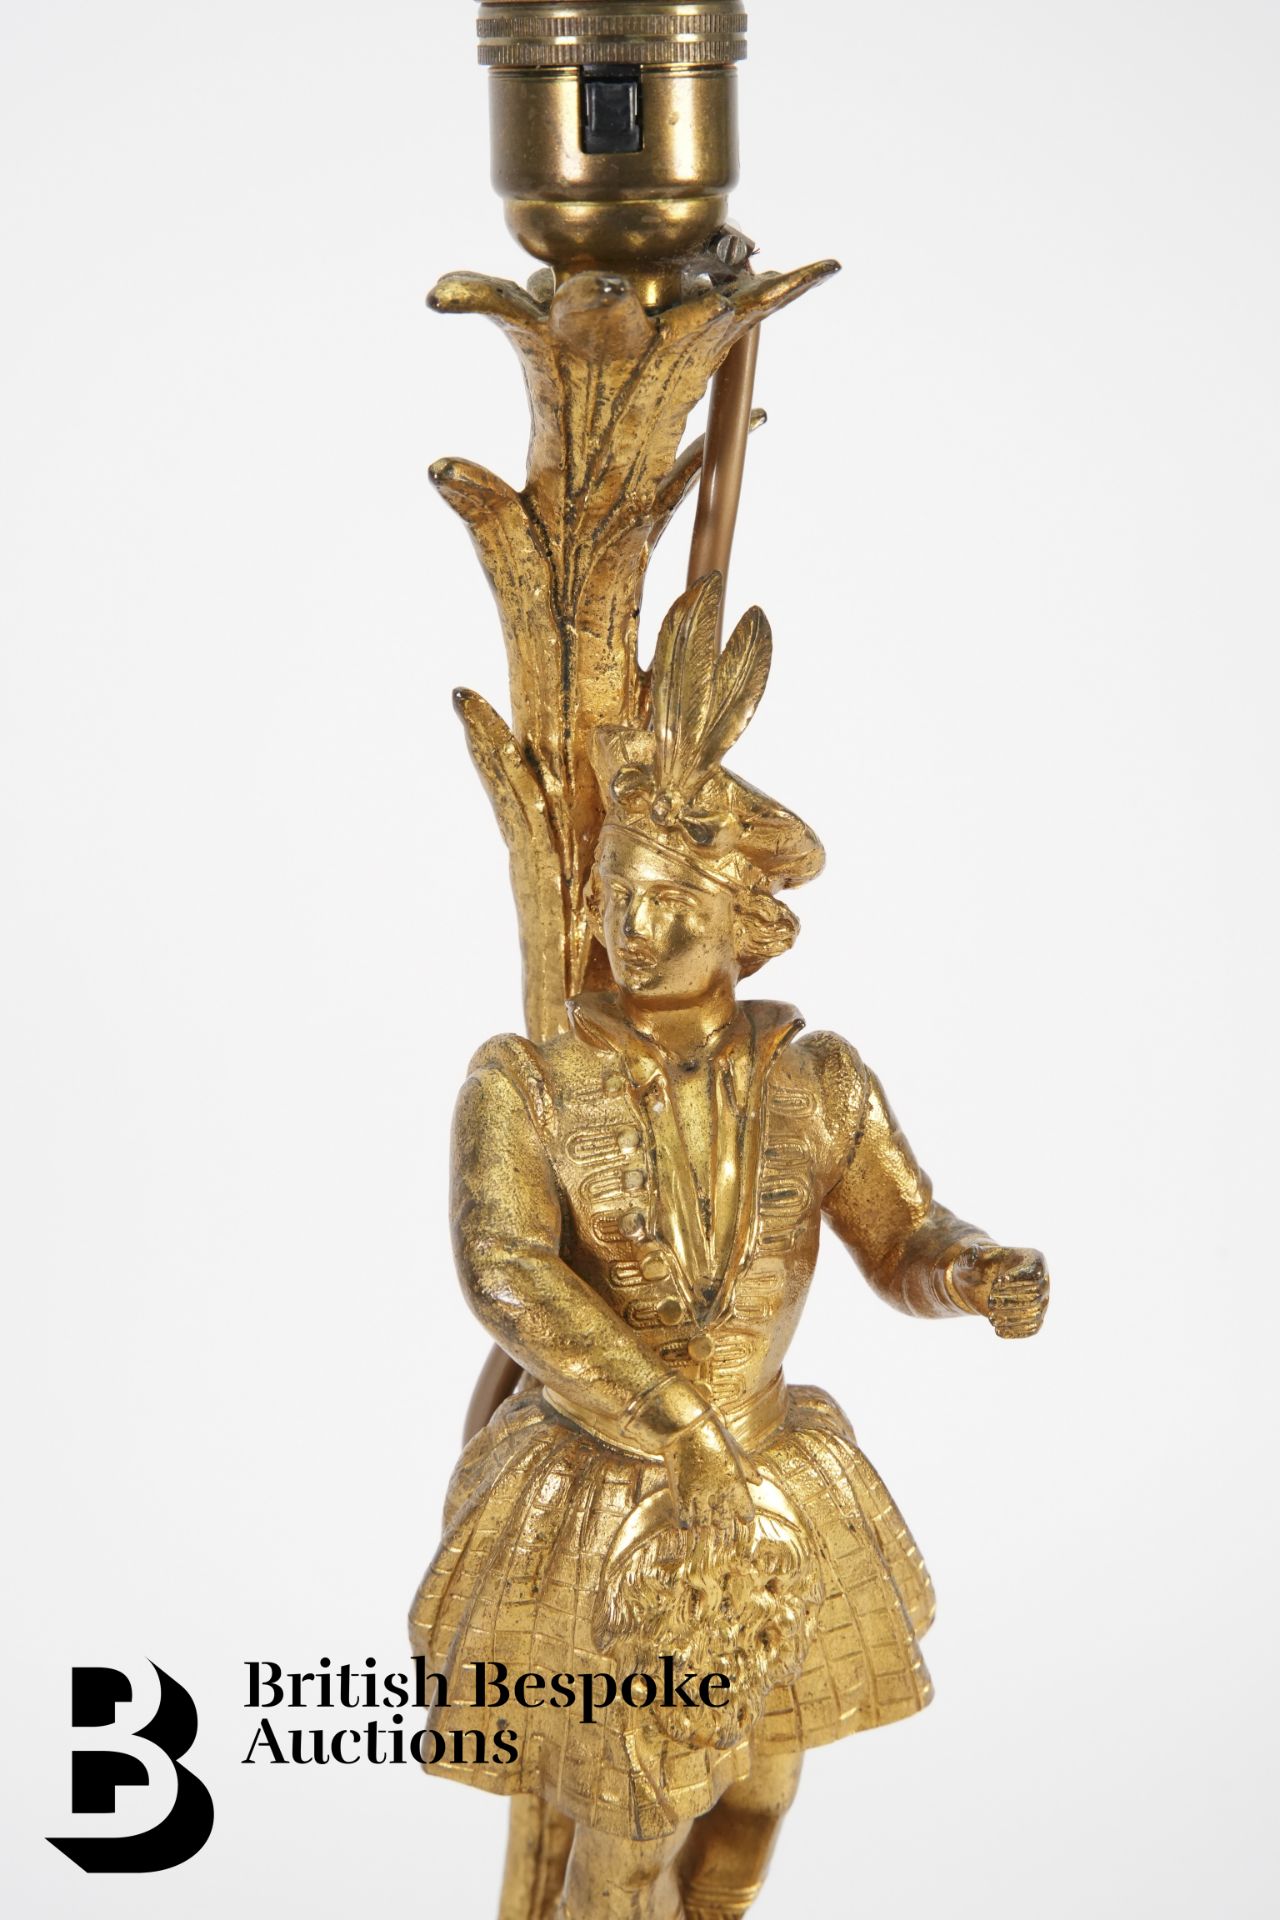 19th Century Gilt Metal Lamp Stand - Image 2 of 5